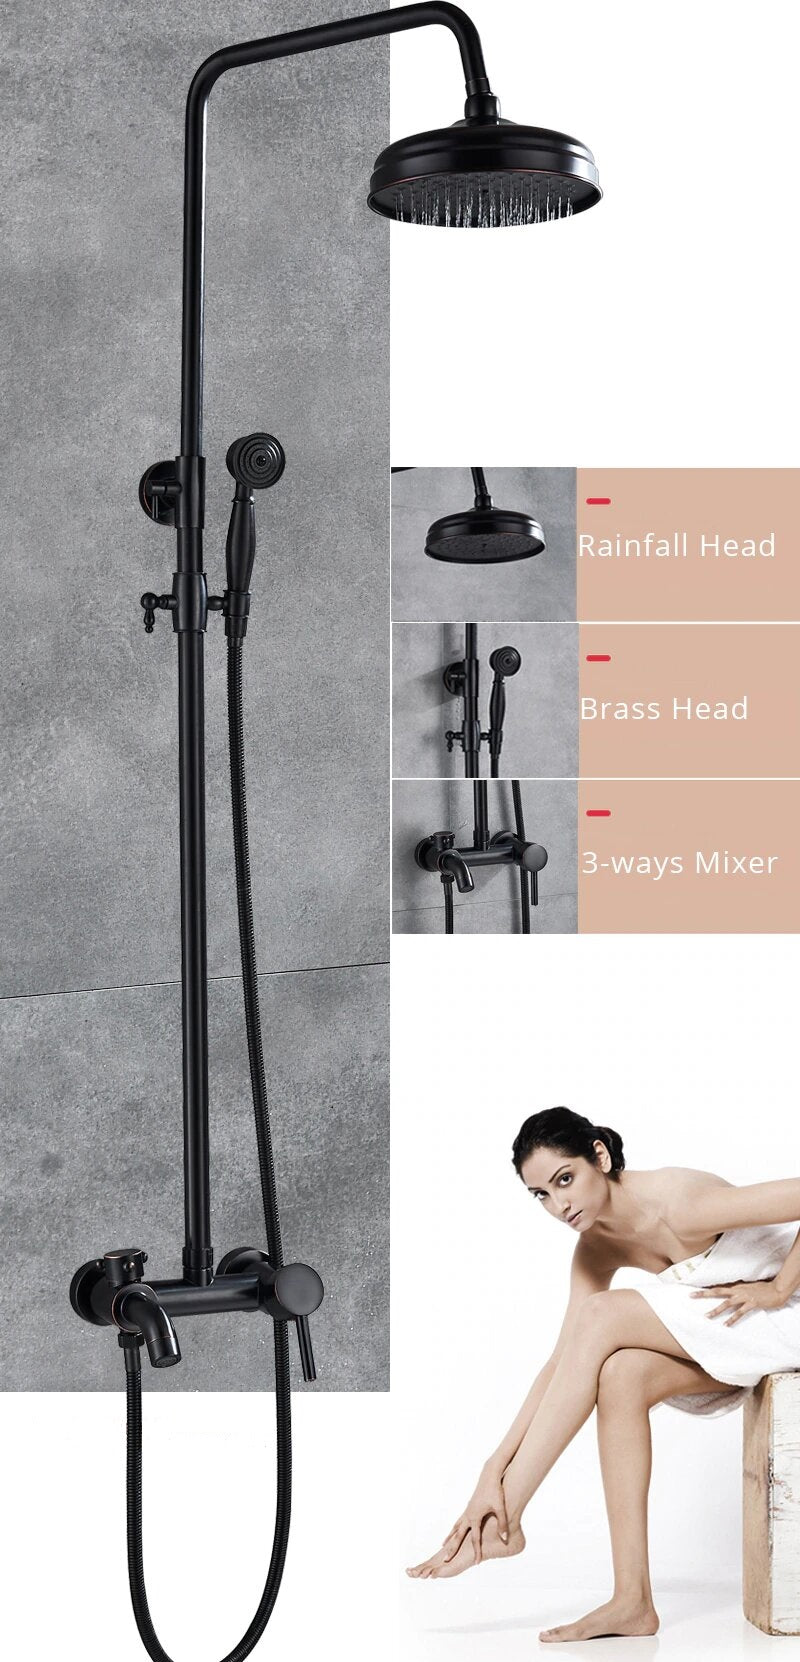 Bathroom Rainfall Shower And Mixer Faucet, Wall Mounted